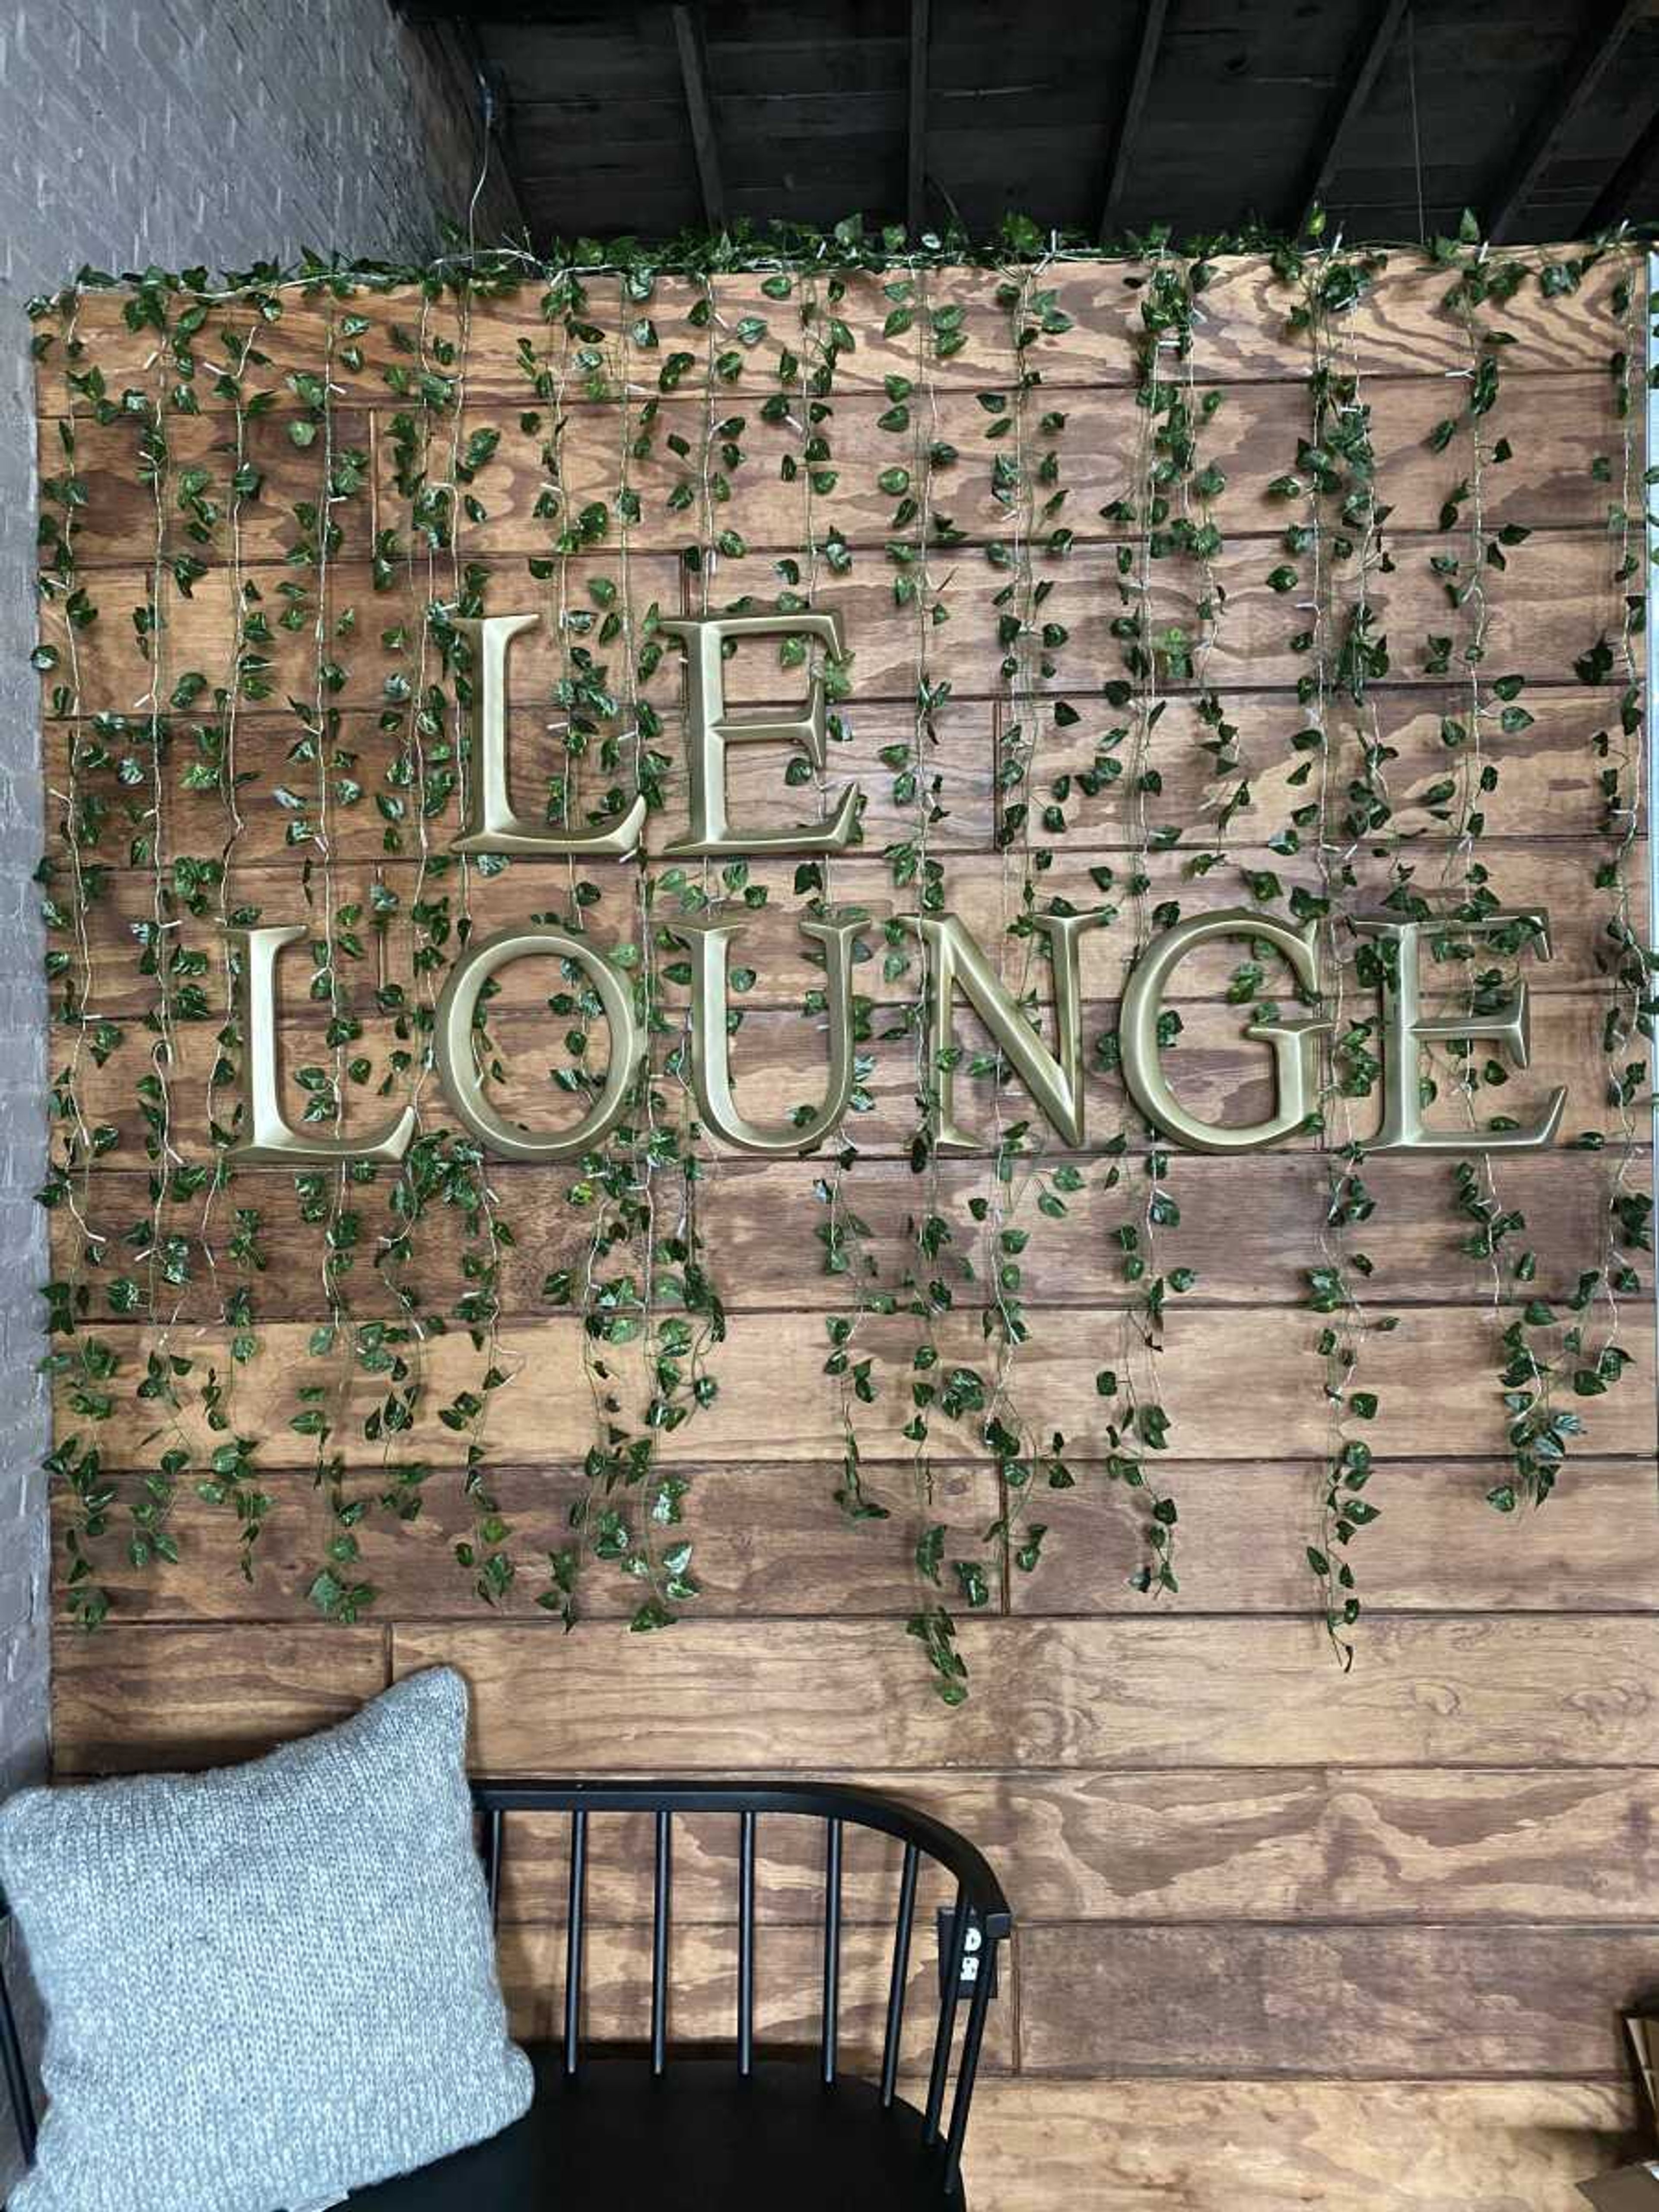 The Le Lounge backdrop guest will see once they walk up the stairs into the restaurant is covered in fake ivy. The restaurant is scheduled to open May 18, tentatively.